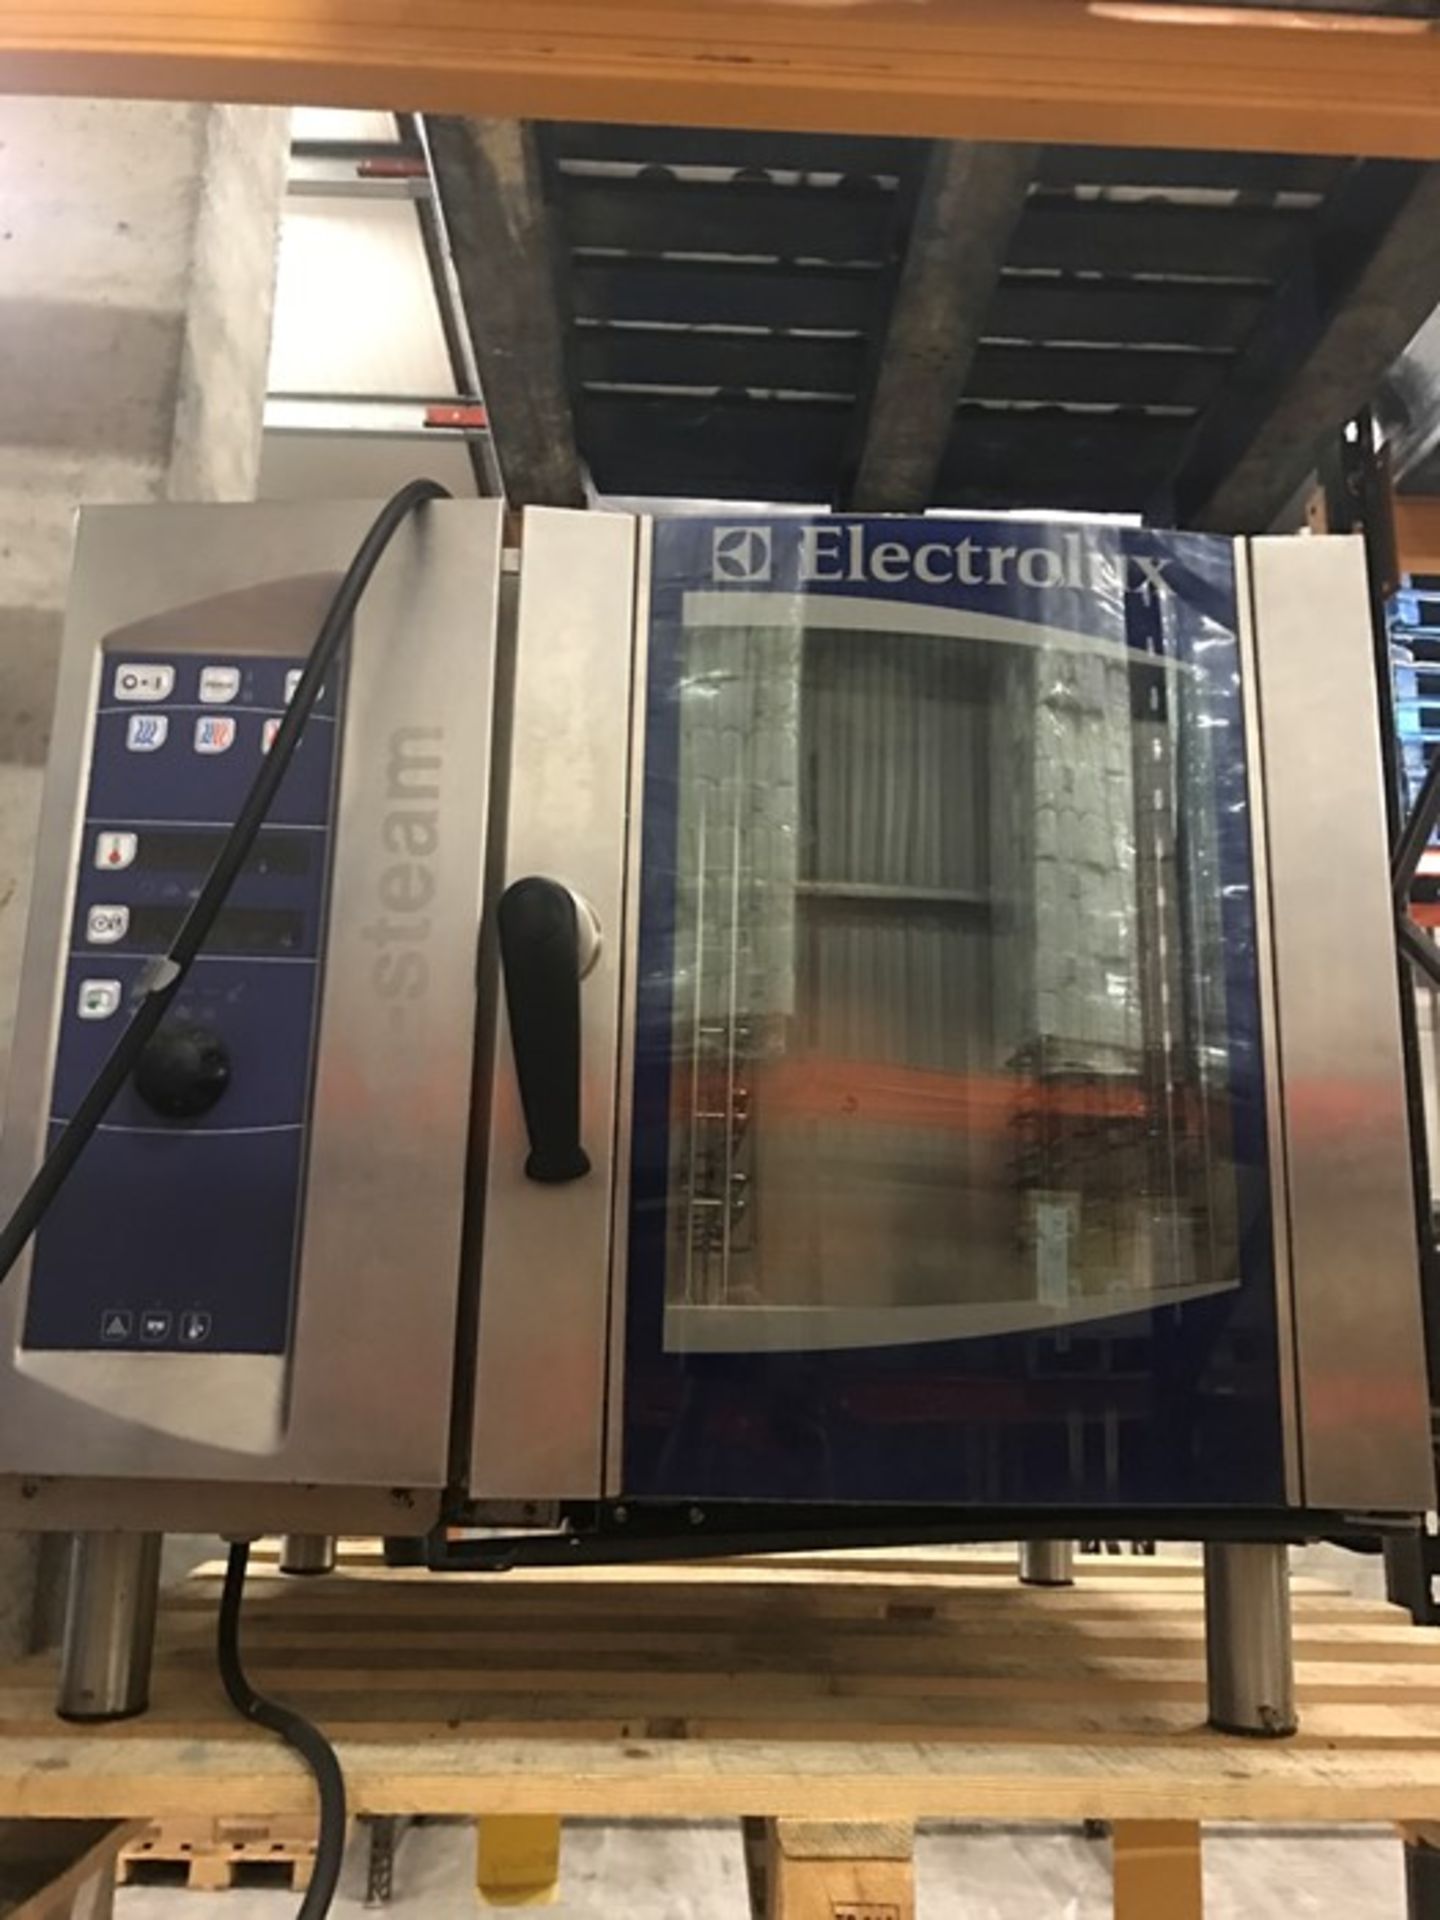 ELECTROLUX CONVECTION OVEN